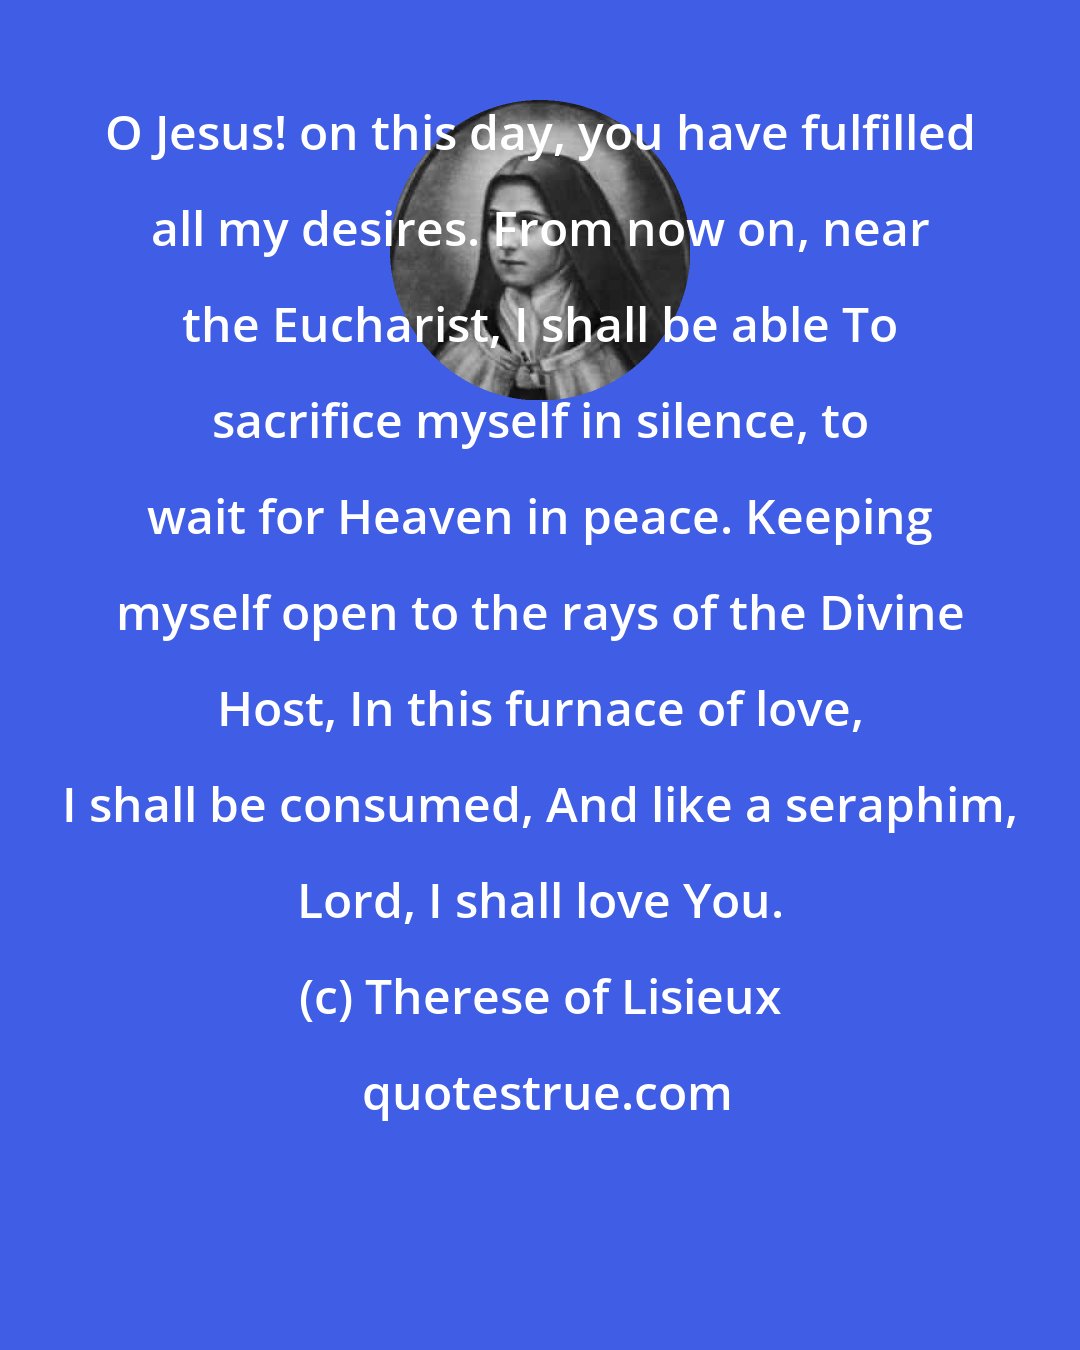 Therese of Lisieux: O Jesus! on this day, you have fulfilled all my desires. From now on, near the Eucharist, I shall be able To sacrifice myself in silence, to wait for Heaven in peace. Keeping myself open to the rays of the Divine Host, In this furnace of love, I shall be consumed, And like a seraphim, Lord, I shall love You.